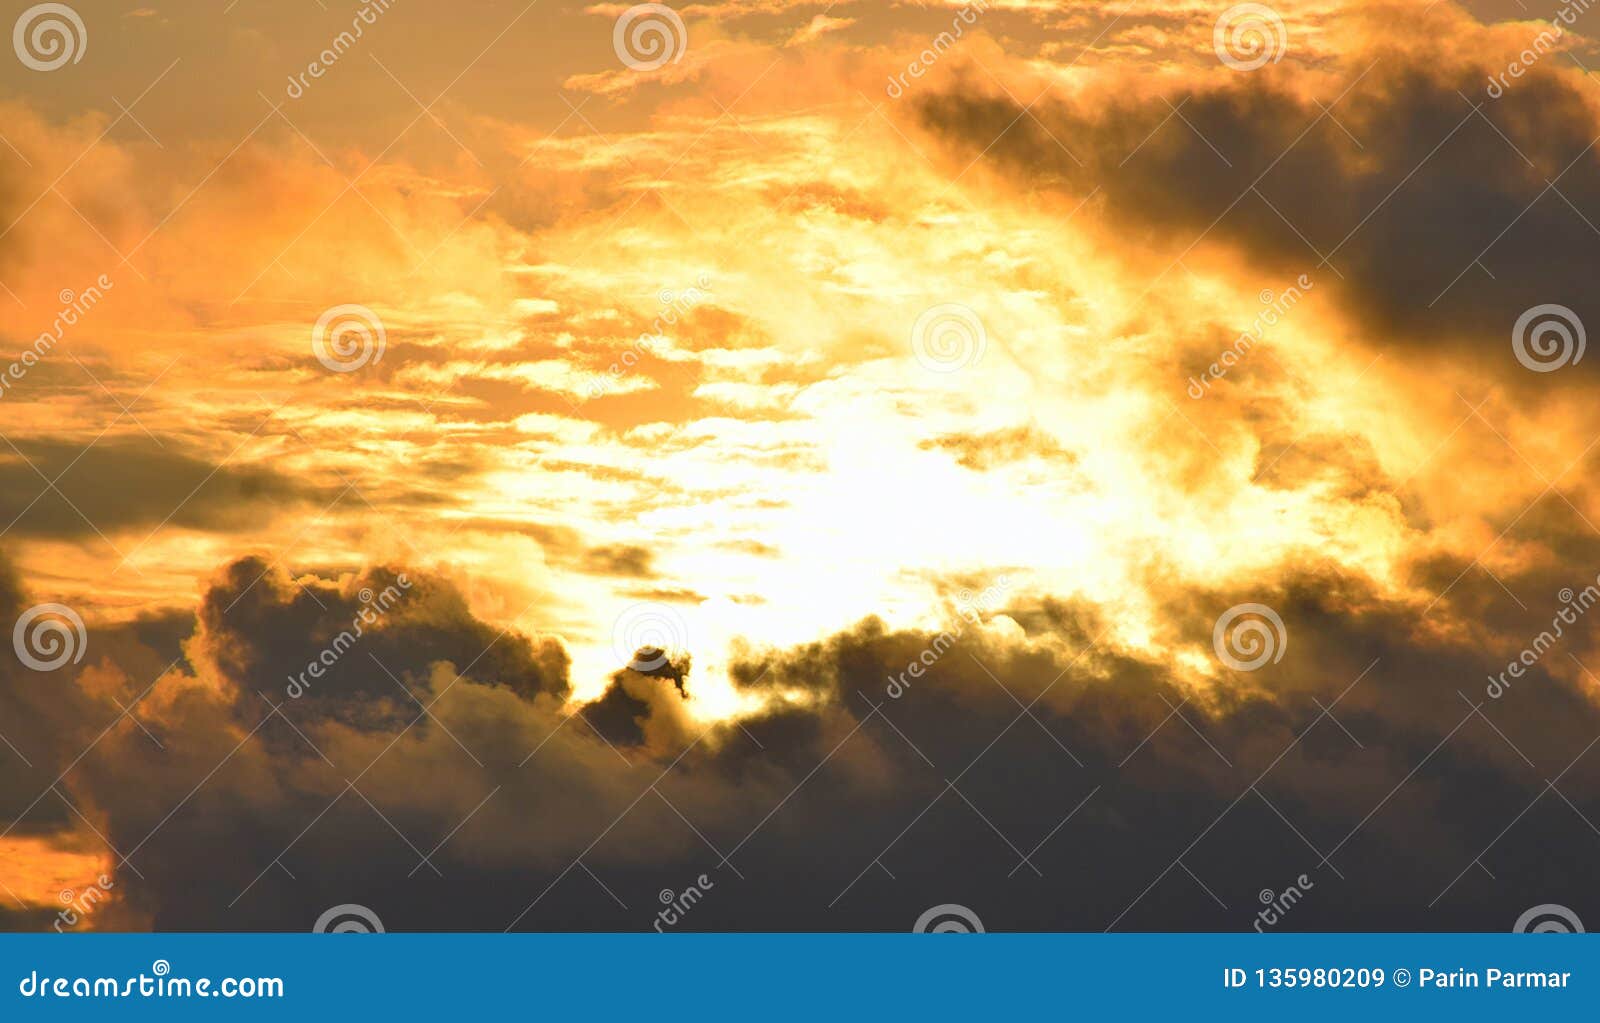 bright golden yellow orange sunlight from dark grey clouds in sky - warm skyscape - heat and solar energy